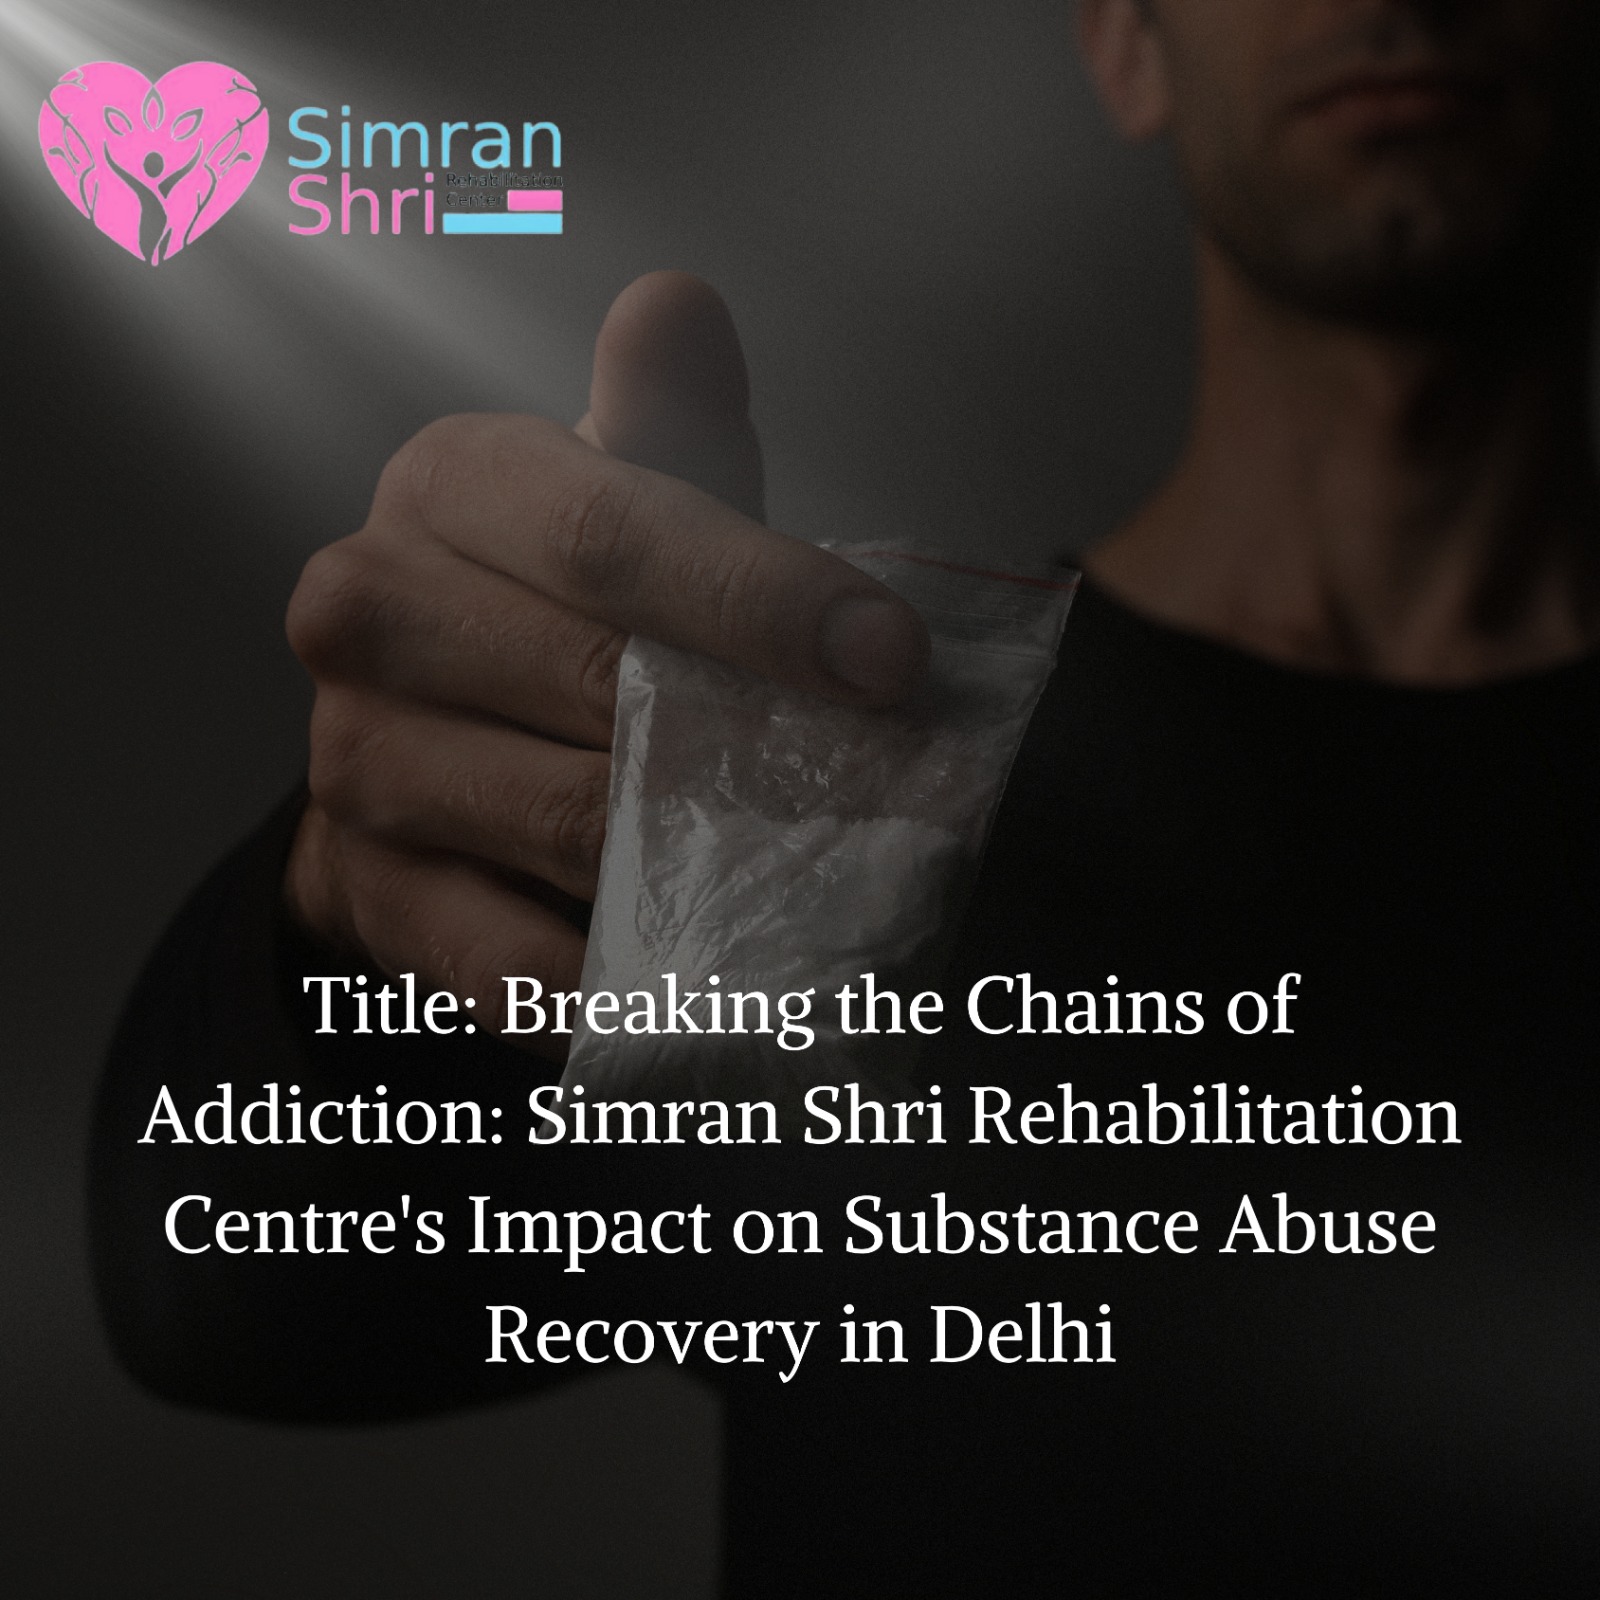 Breaking the Chains of Addiction: Simran Shri Rehabilitation Centre's Impact on Substance Abuse Recovery in Delhi